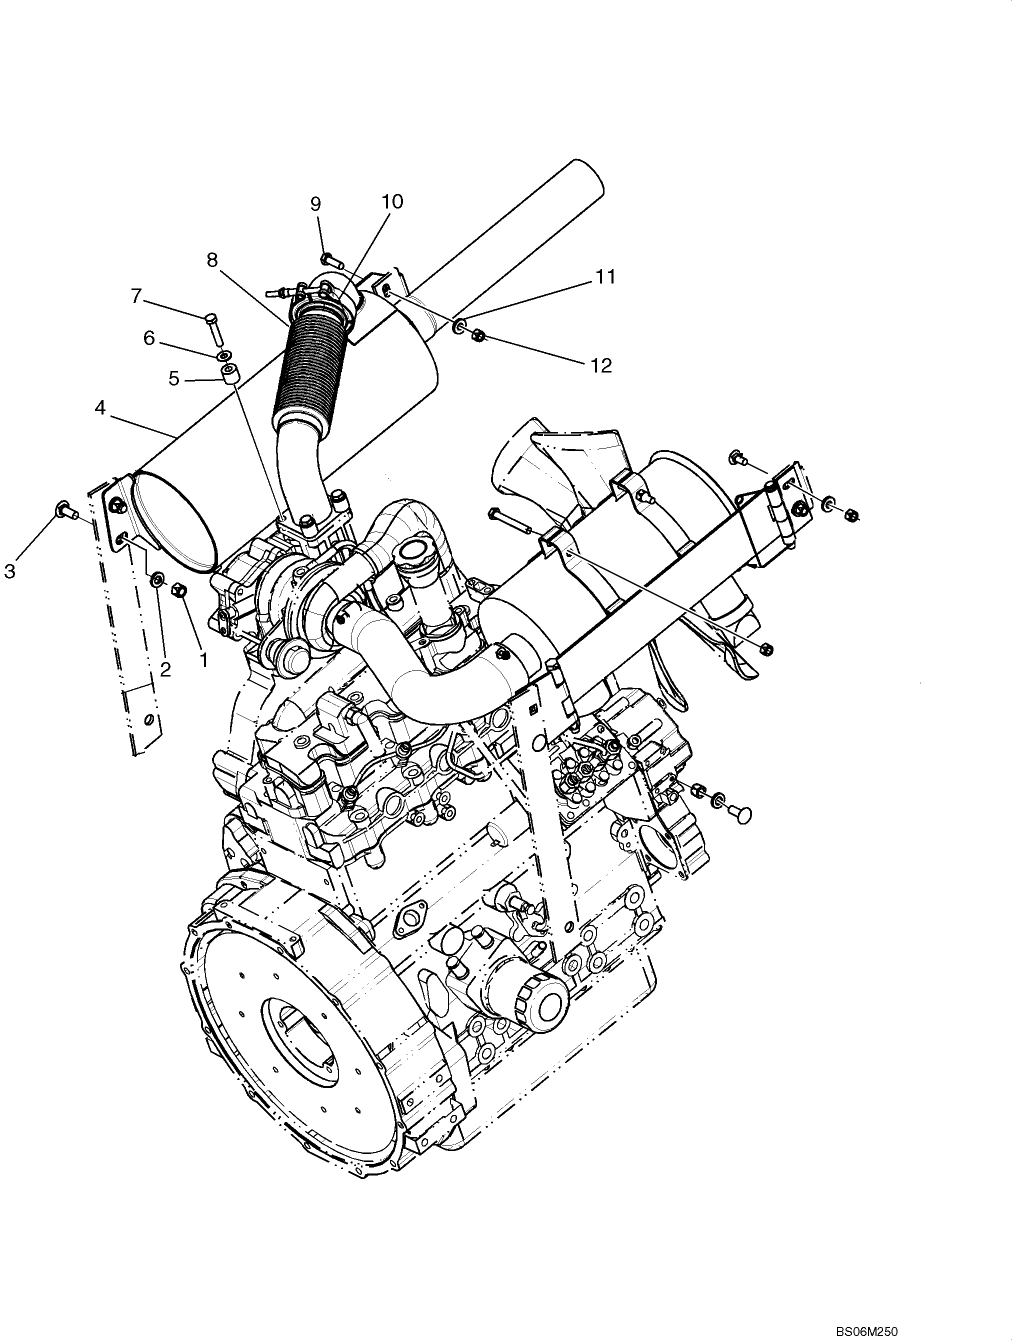 02-03 EXHAUST SYSTEM